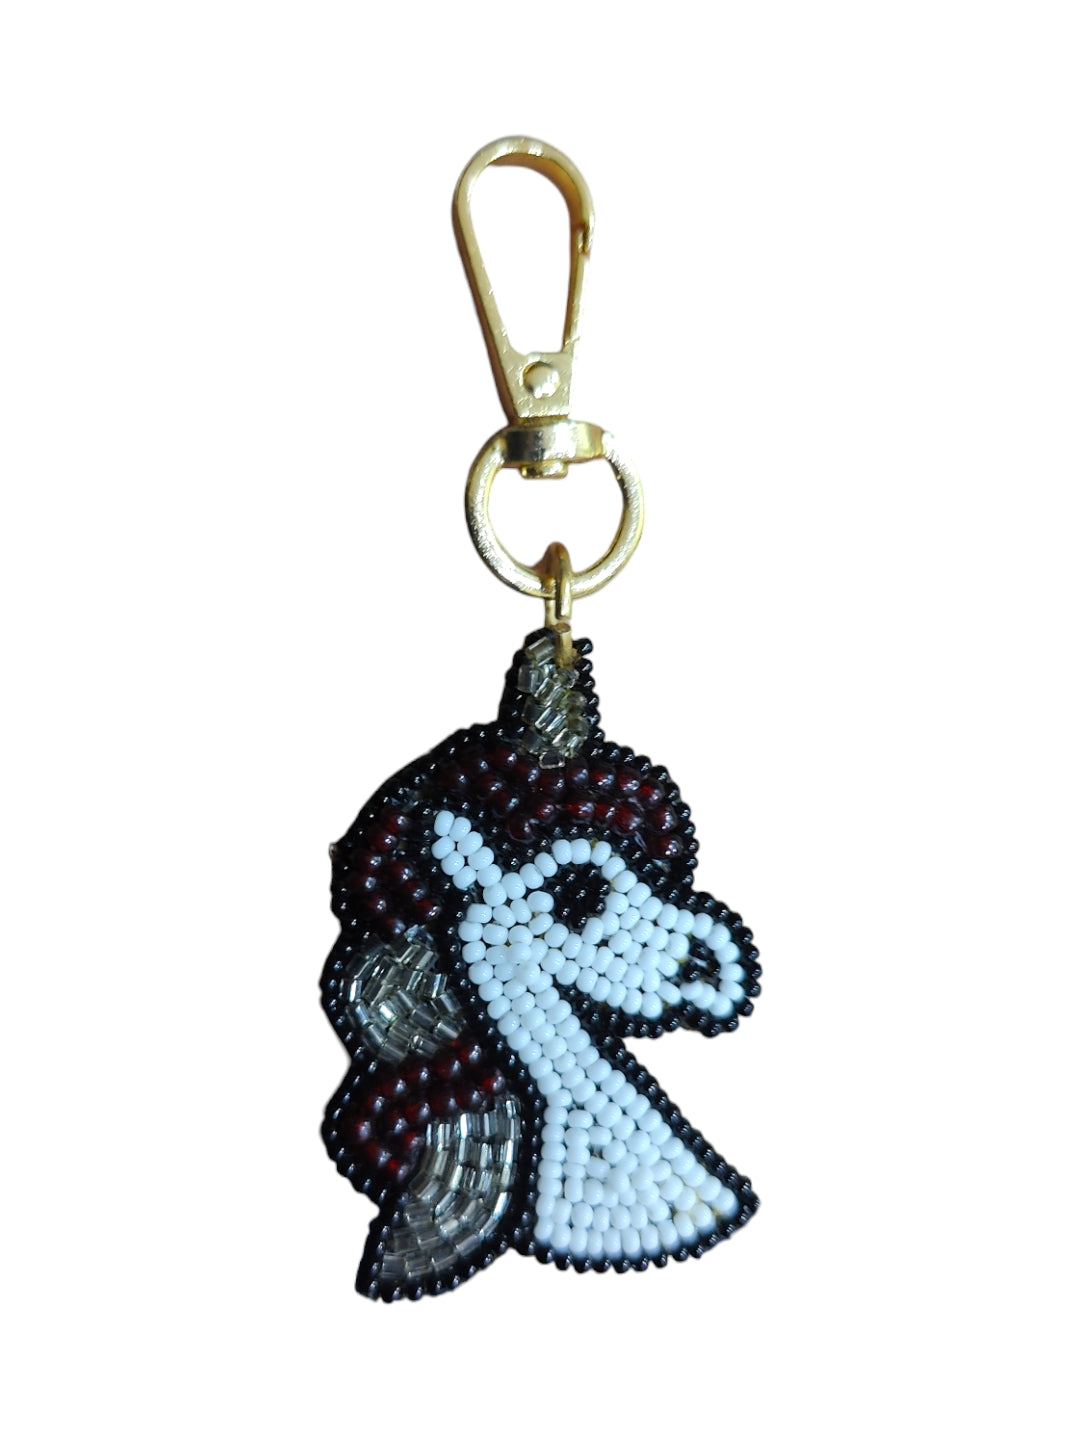  Let this blue unicorn charm accompany you on your journey, sparking joy and wonder wherever you go.